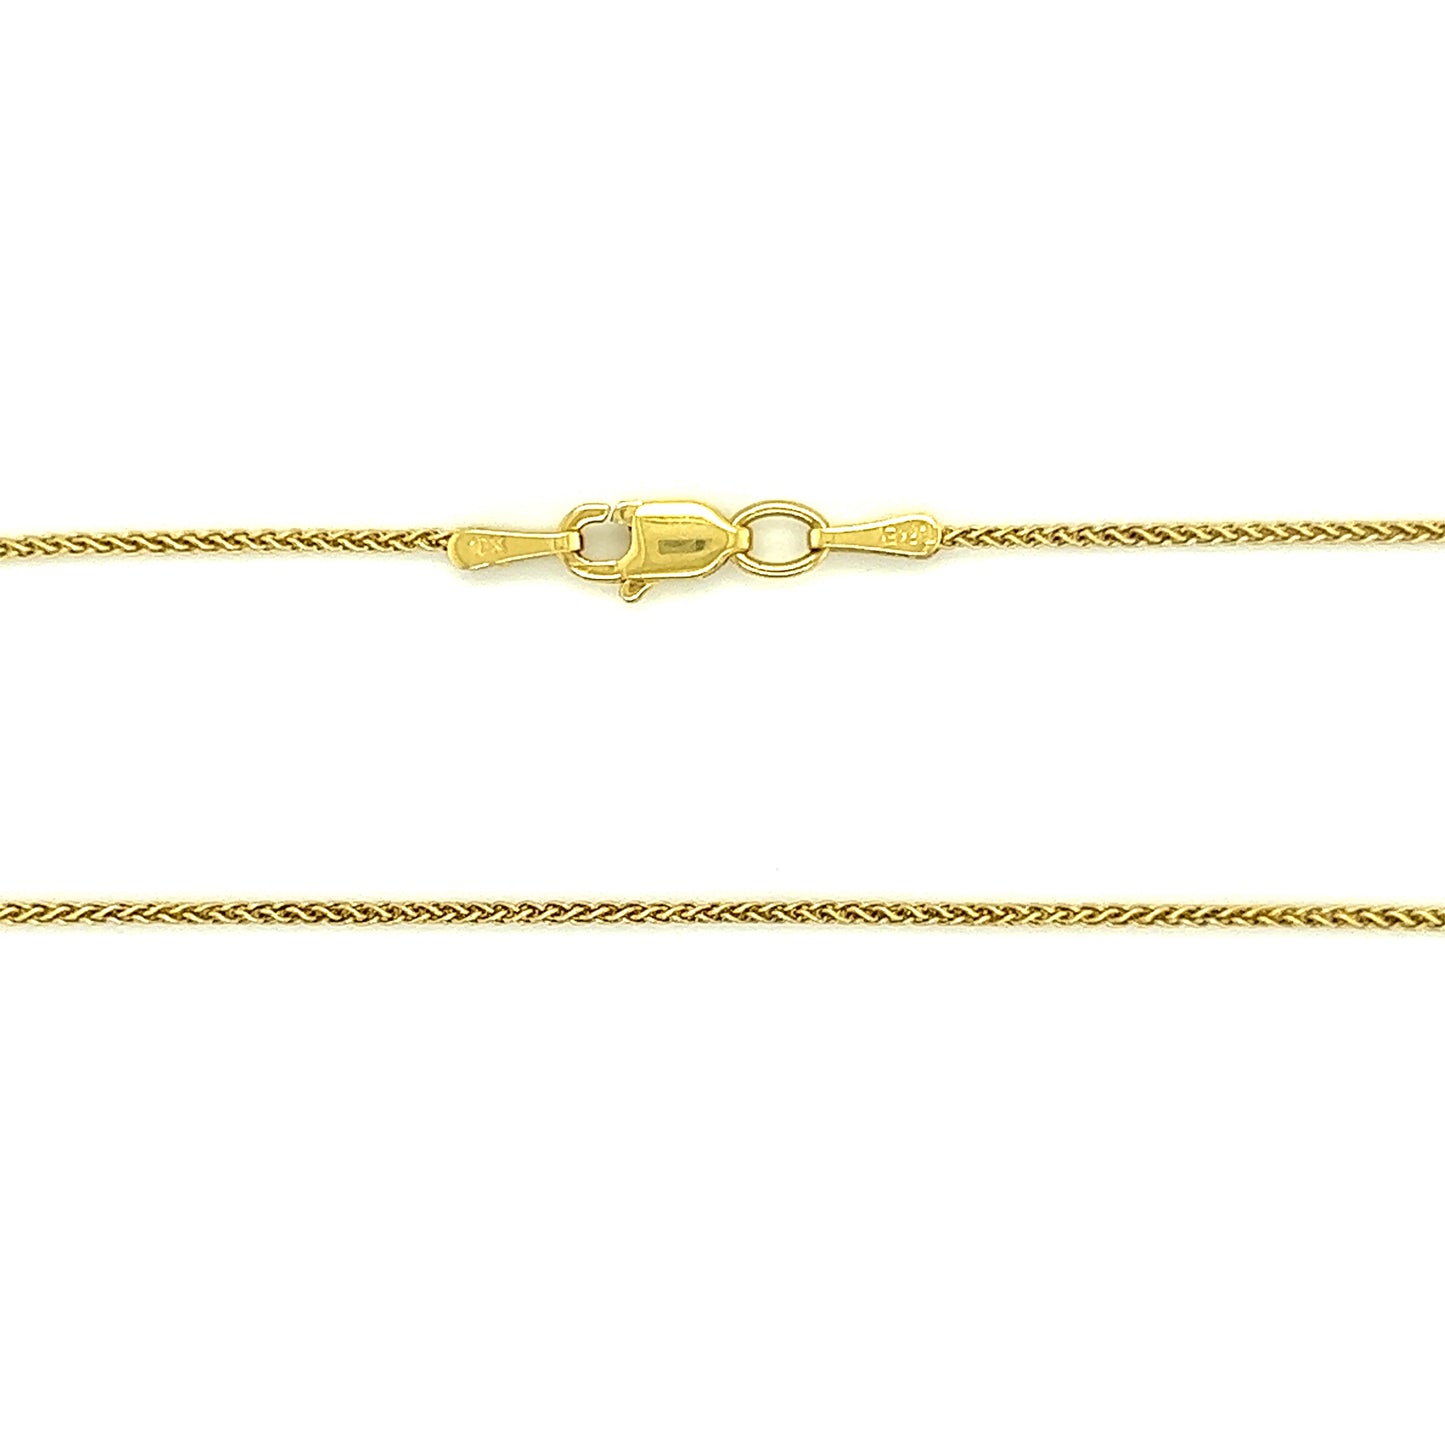 Wheat Chain with 16in Length in 10K Yellow Gold Chain and Clasp View